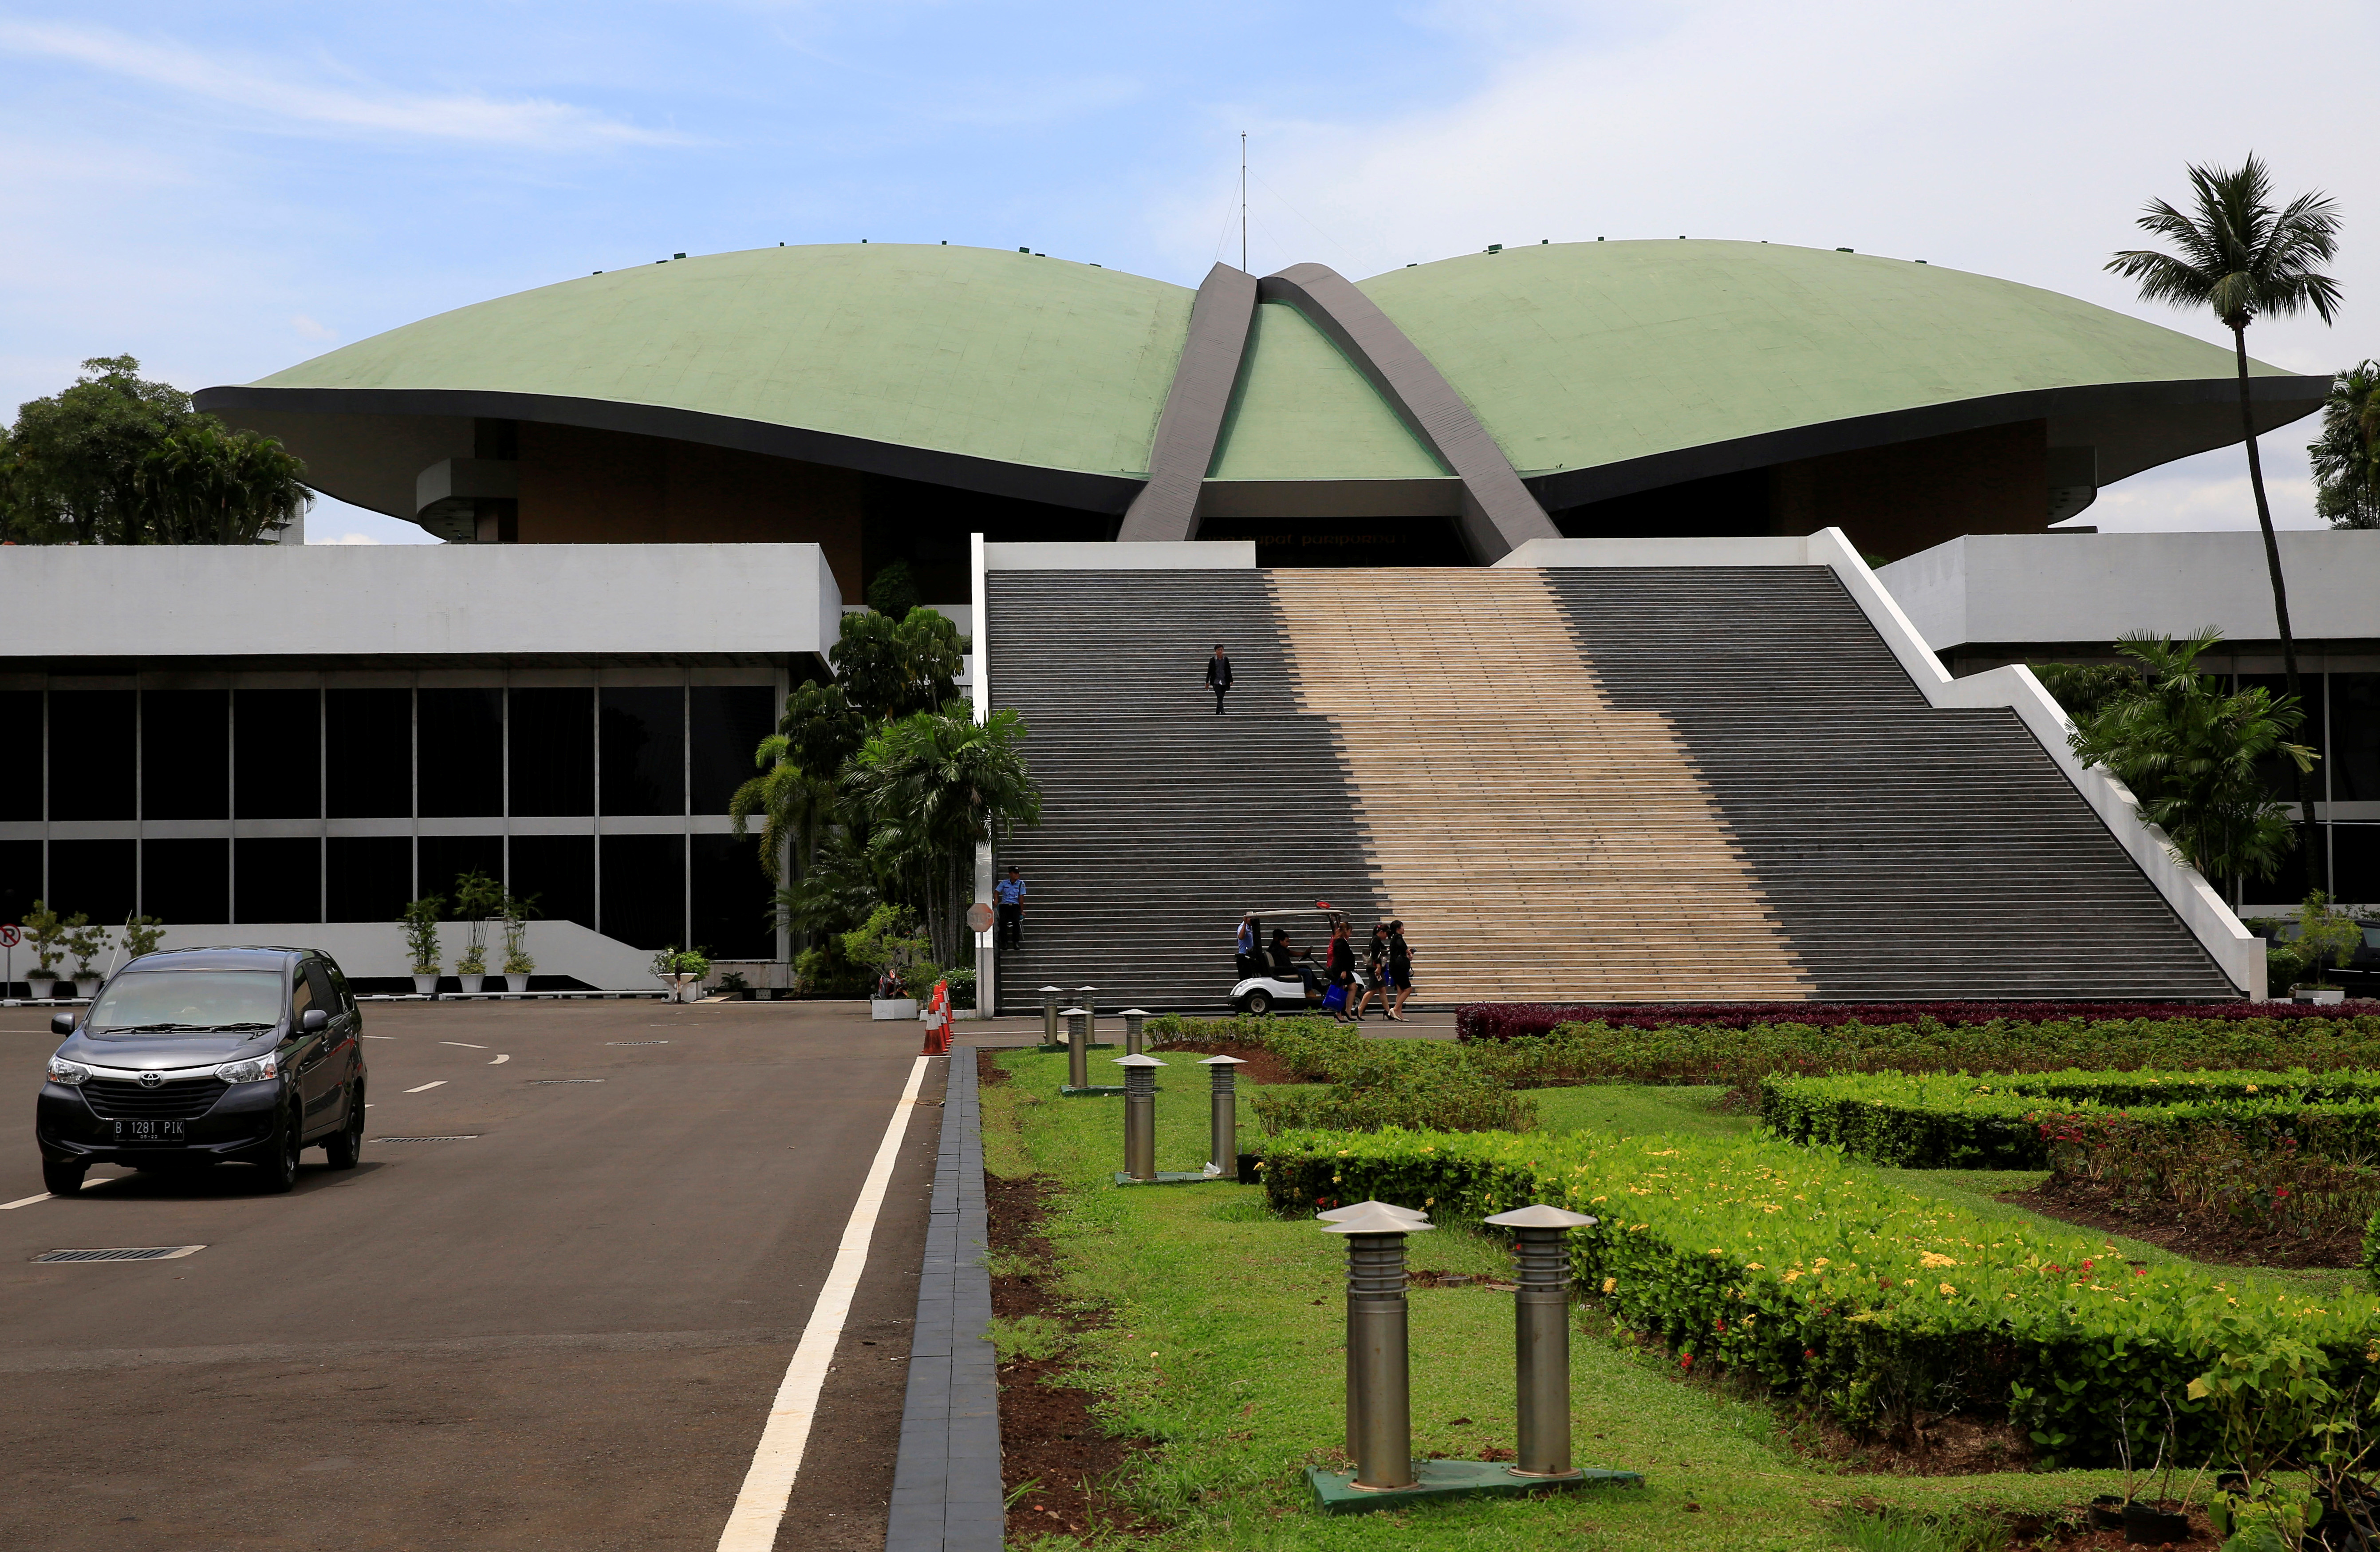 A view of Indonesia's Parliament building in Jakarta